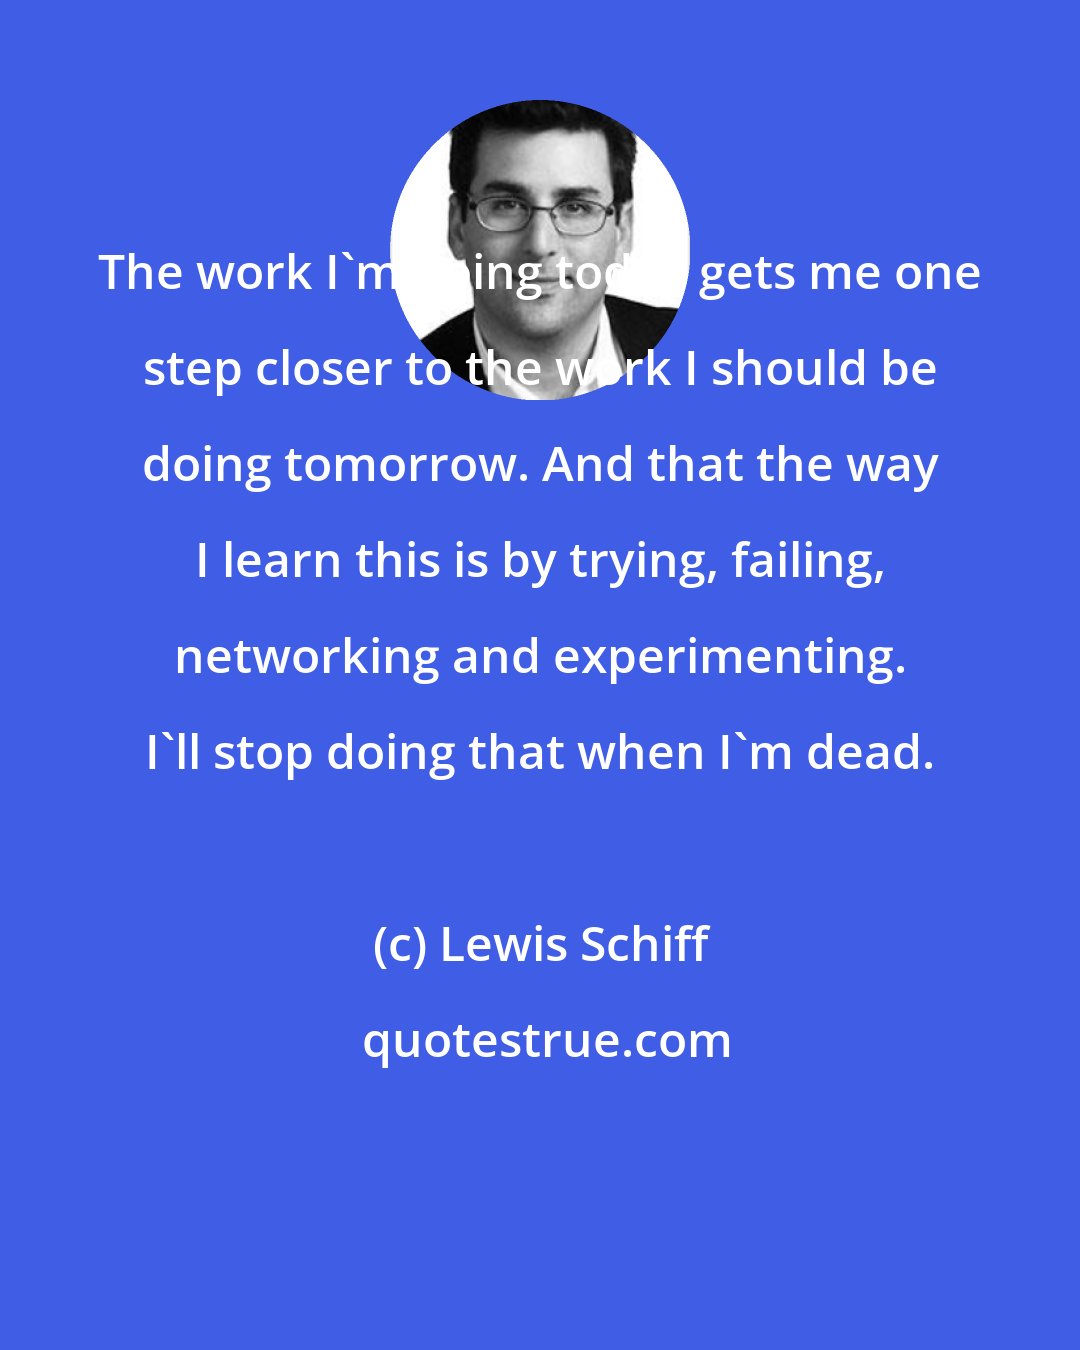 Lewis Schiff: The work I'm doing today gets me one step closer to the work I should be doing tomorrow. And that the way I learn this is by trying, failing, networking and experimenting. I'll stop doing that when I'm dead.